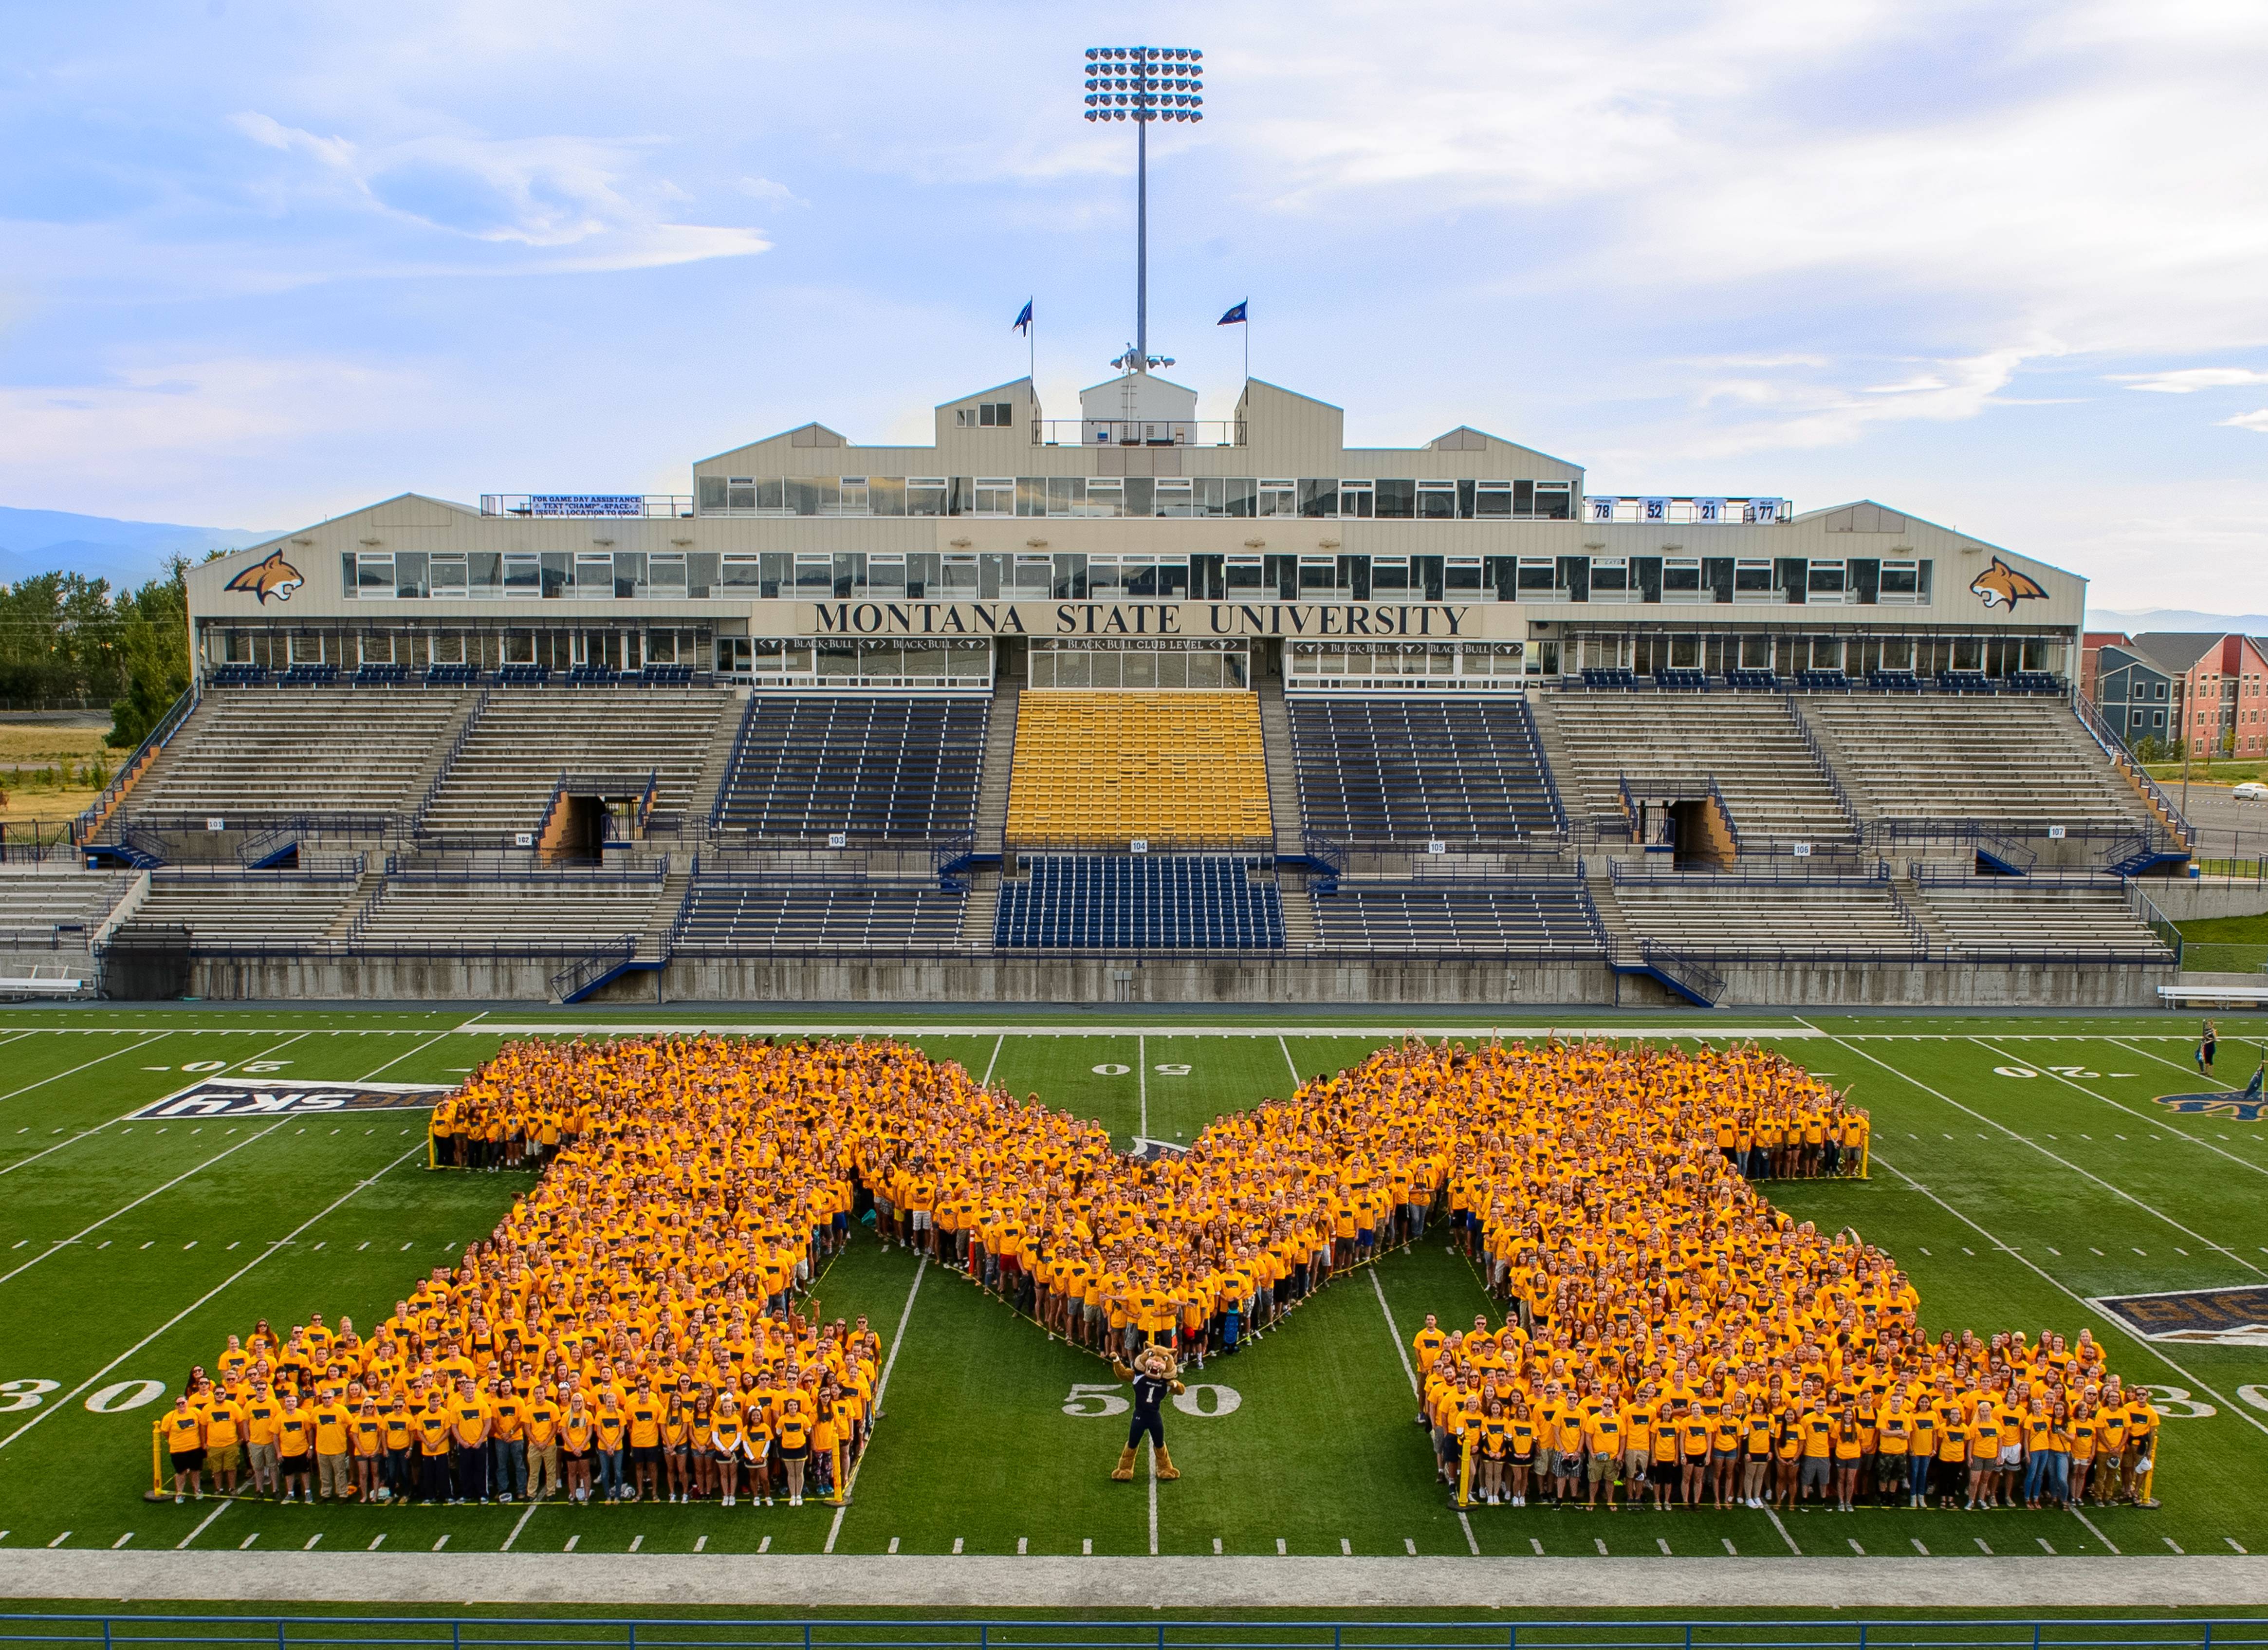 Freshman Students in an "M" formation on the football field